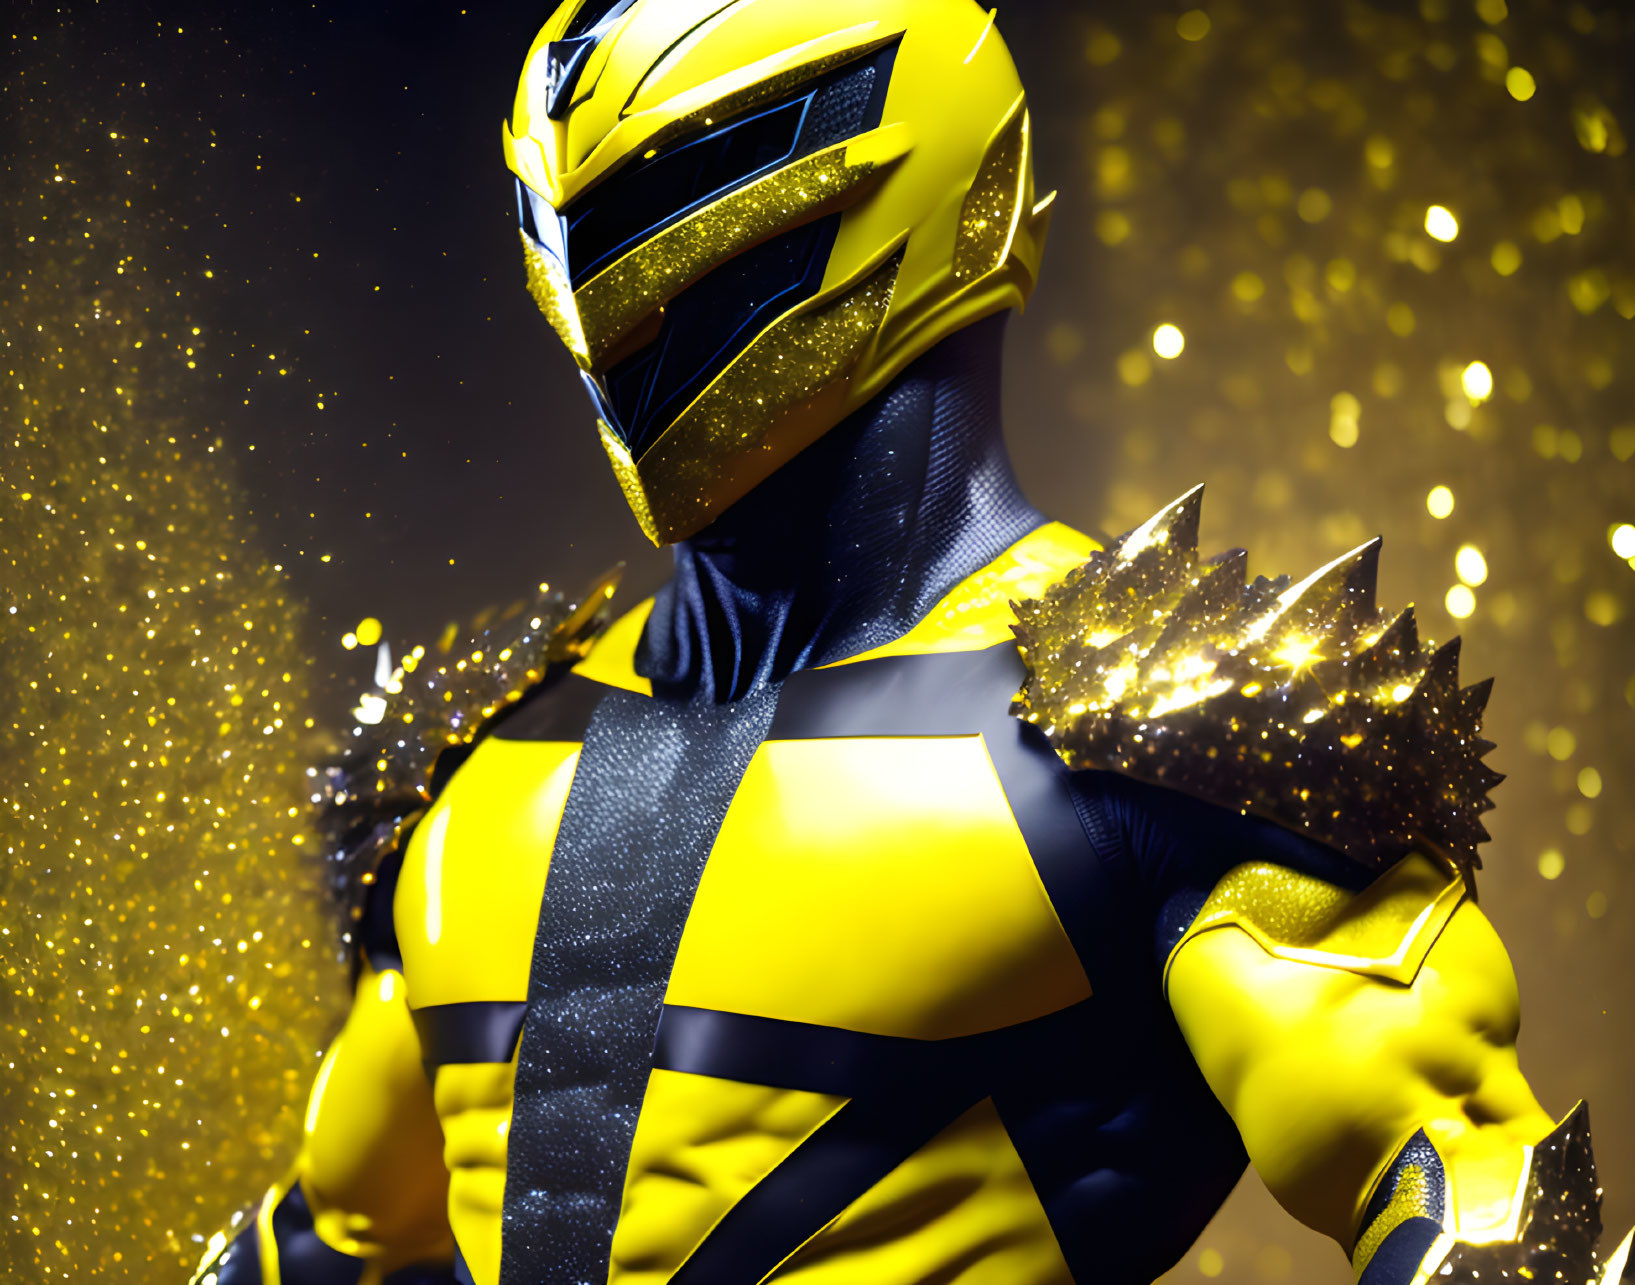 Superhero in Yellow and Black Costume on Gold Background